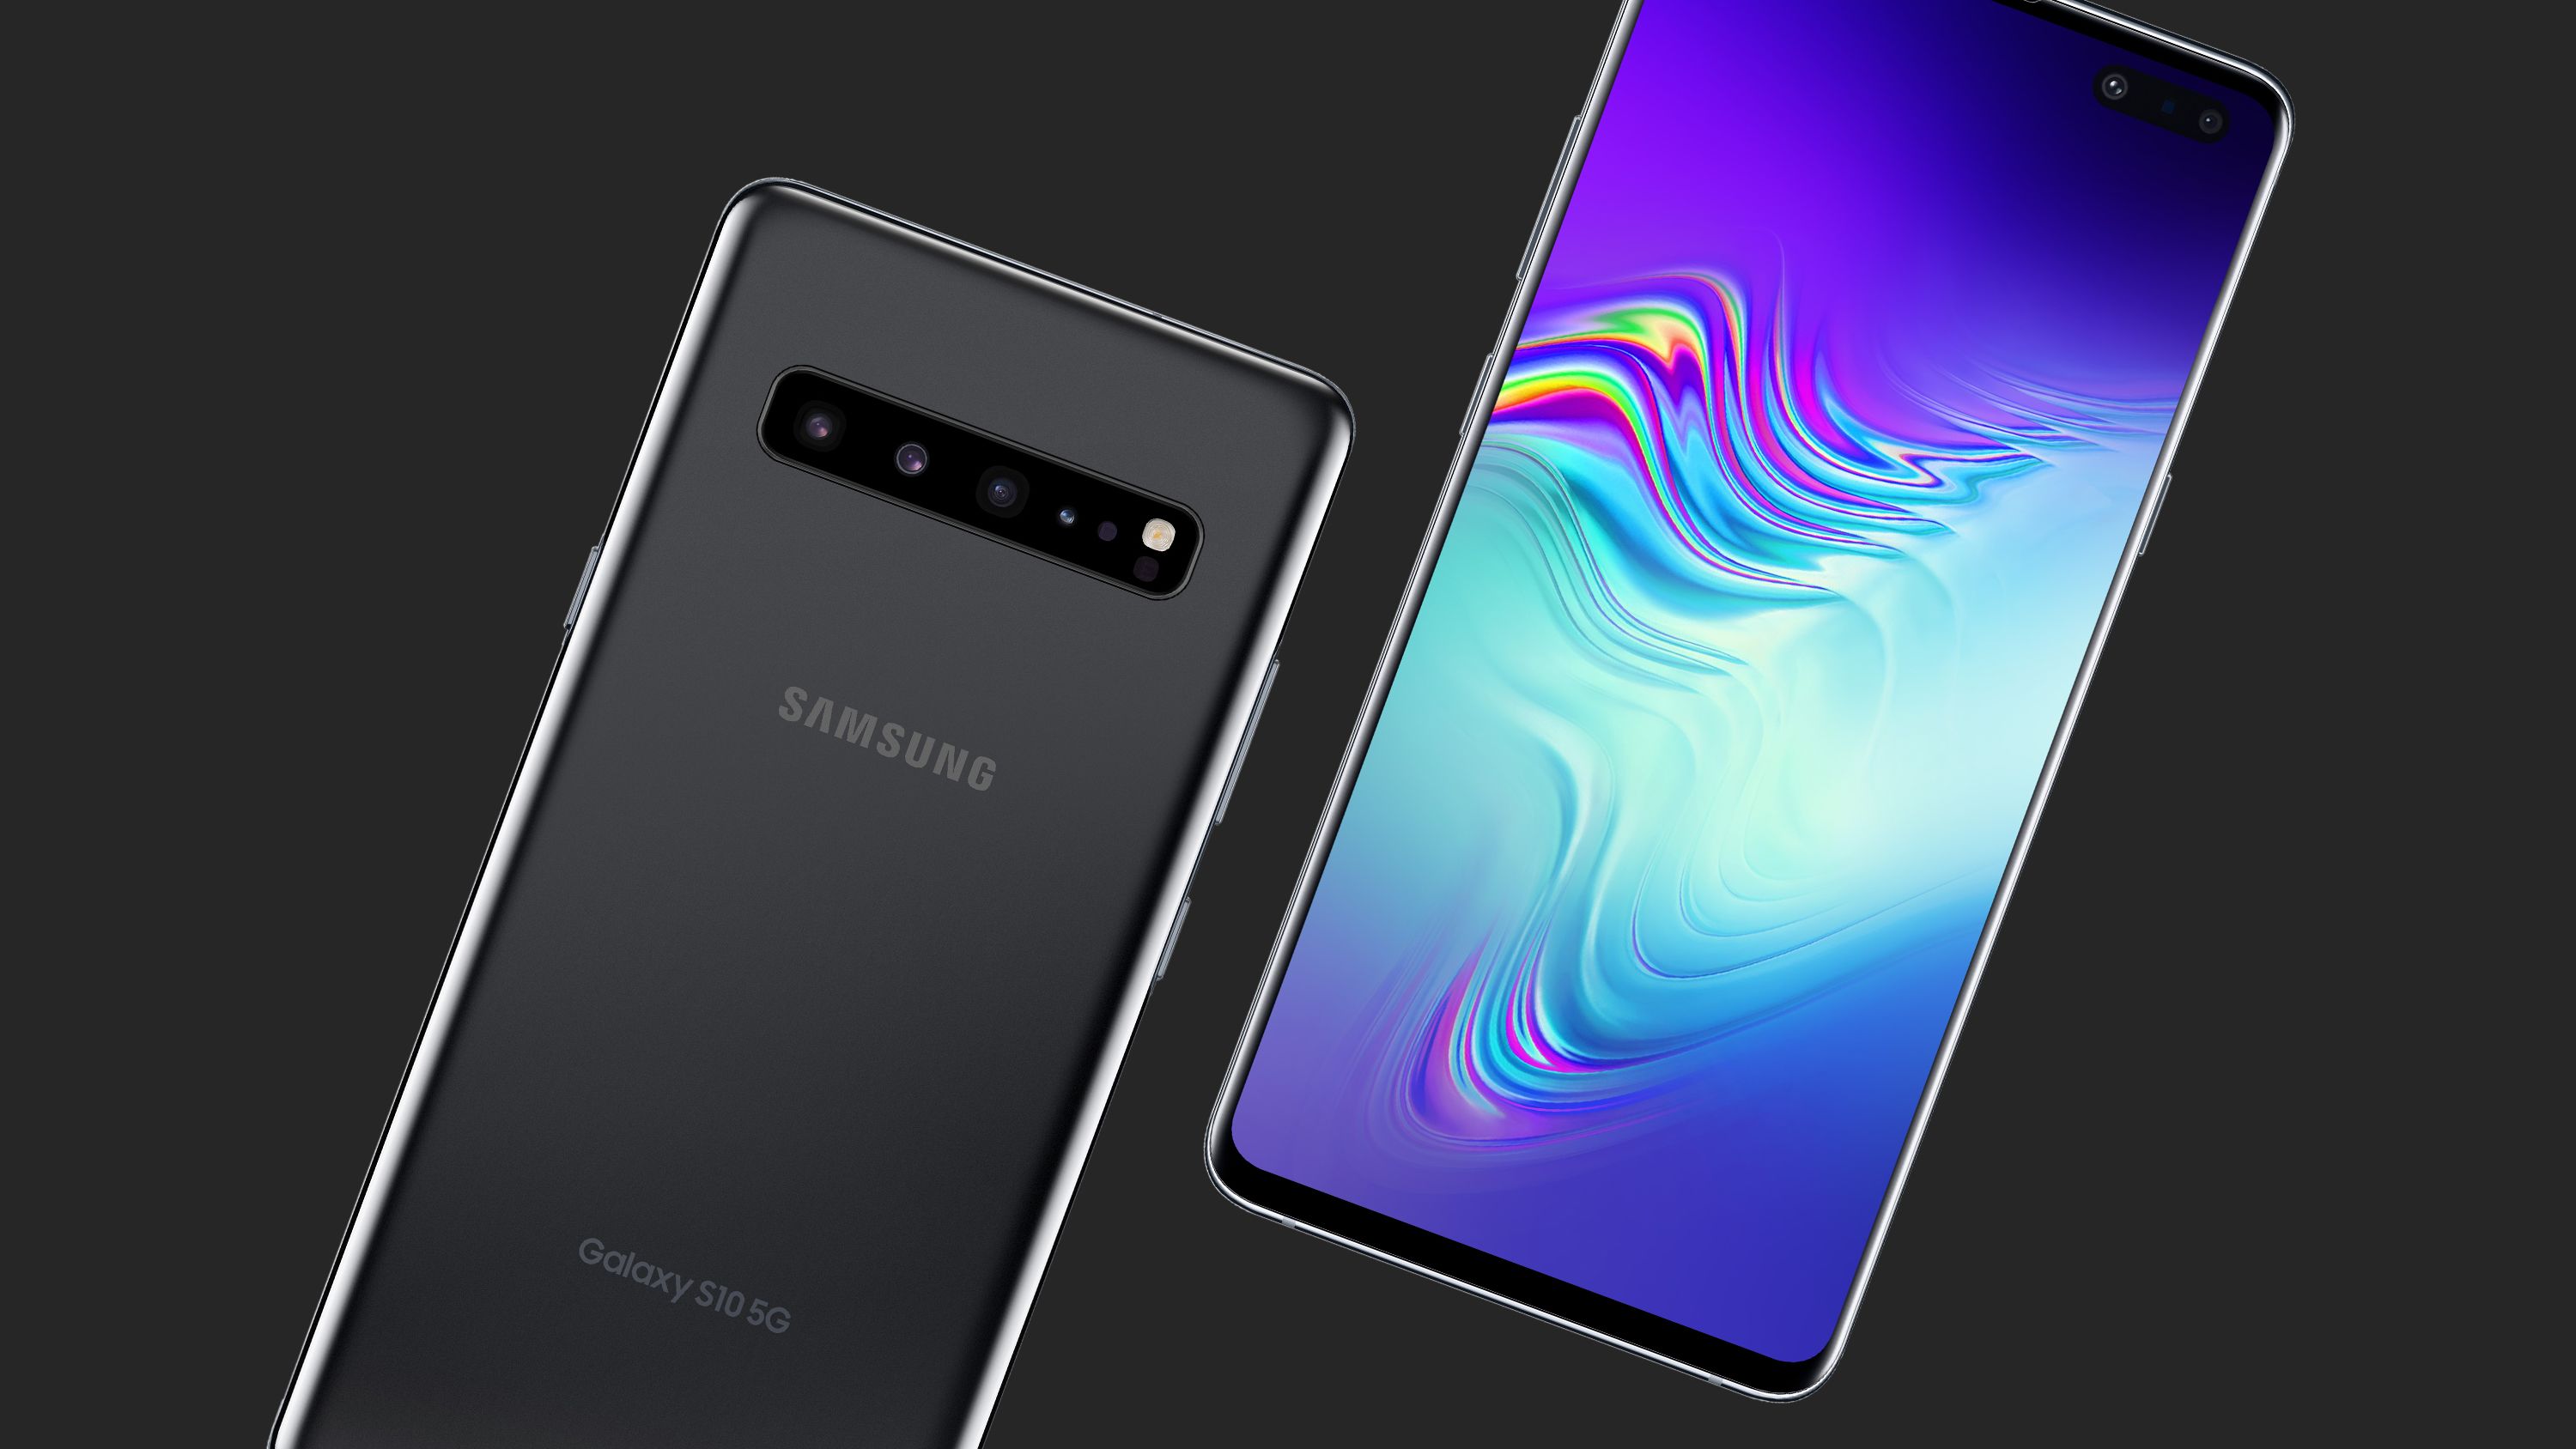 Galaxy Note 10 Plus 5G will cost $1,300 and start as a Verizon